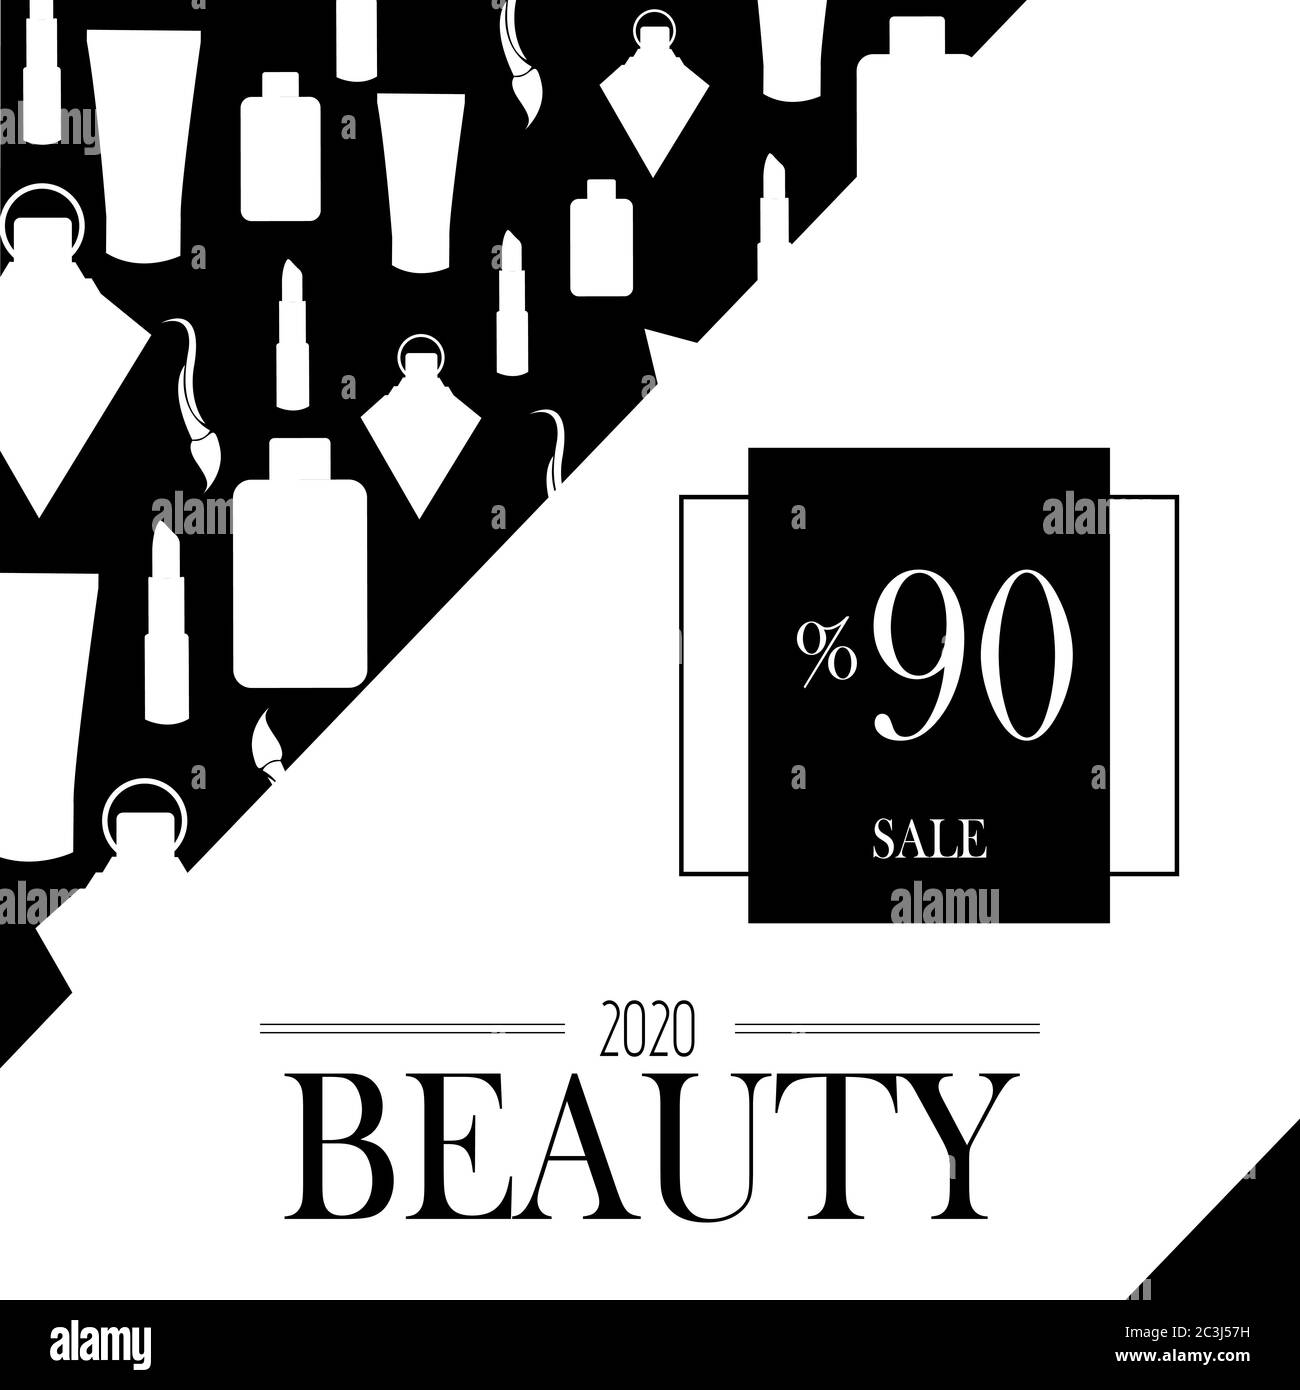 Cosmetics on black and white background. 90% advertising poster design for beauty store, blog, Magazine, offers and promotion. Vector illustration. Stock Vector